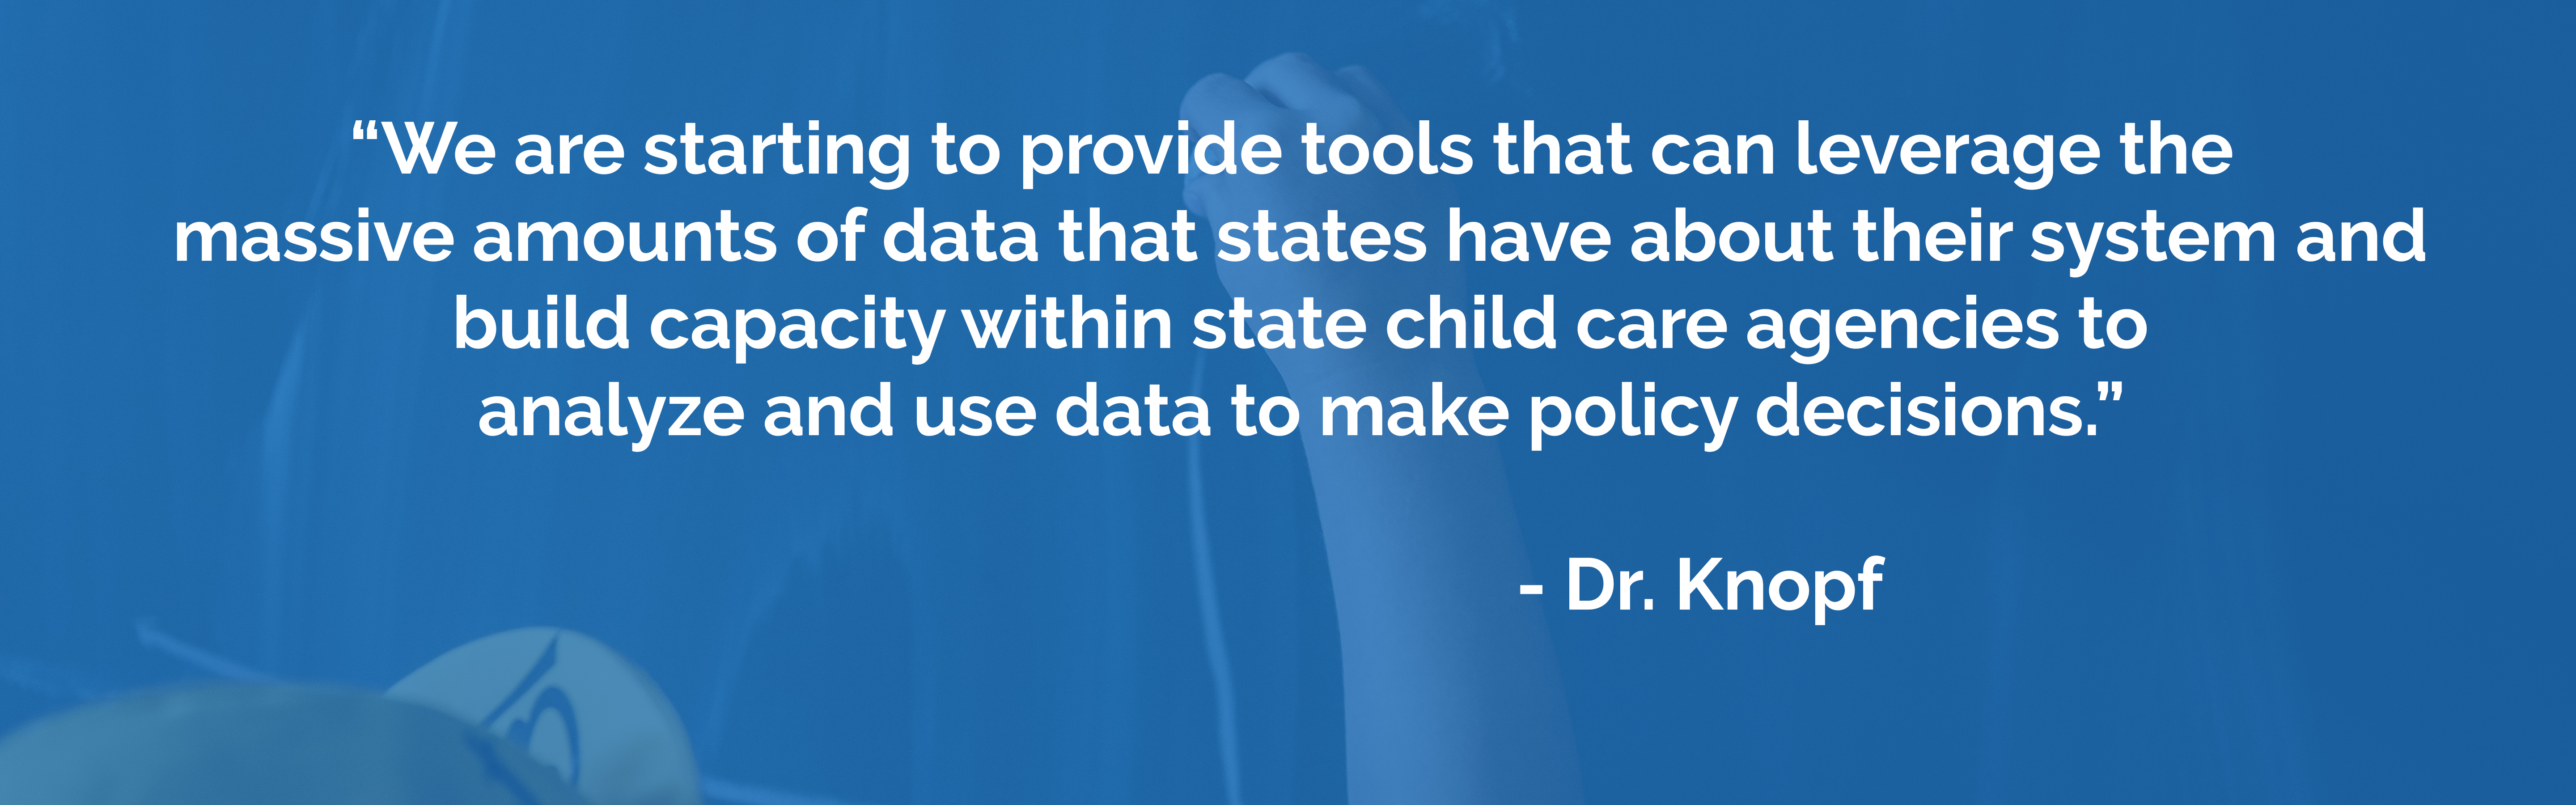 We are starting to provide tools that can leverage the massive amounts of data that states have about their system and build capacity within state child care agencies to analyze and use data to make policy decisions, said Dr. Knopf.